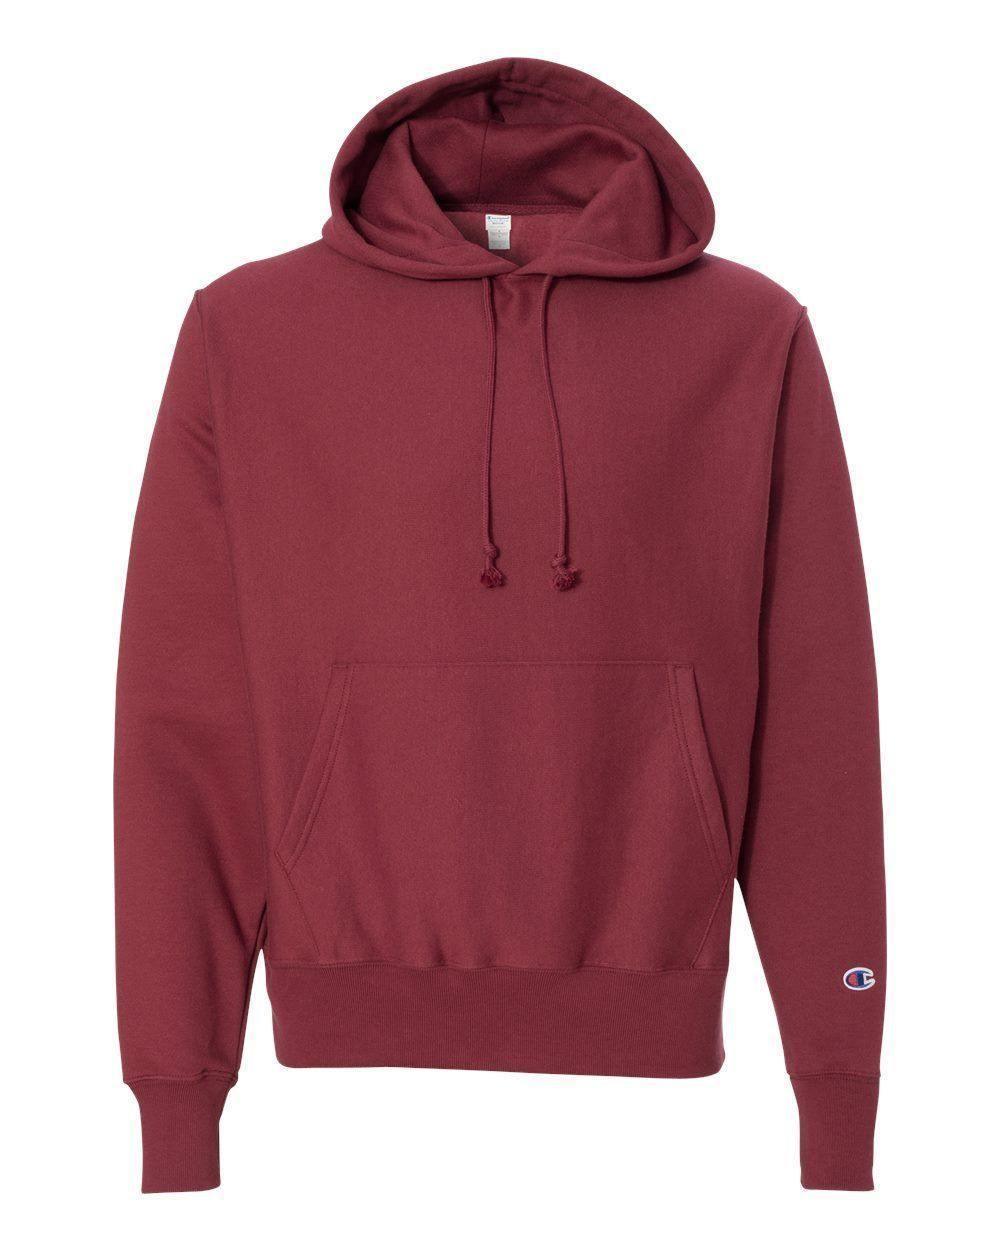 Champion Reverse Weave Hoodie - Constantly Create Shop